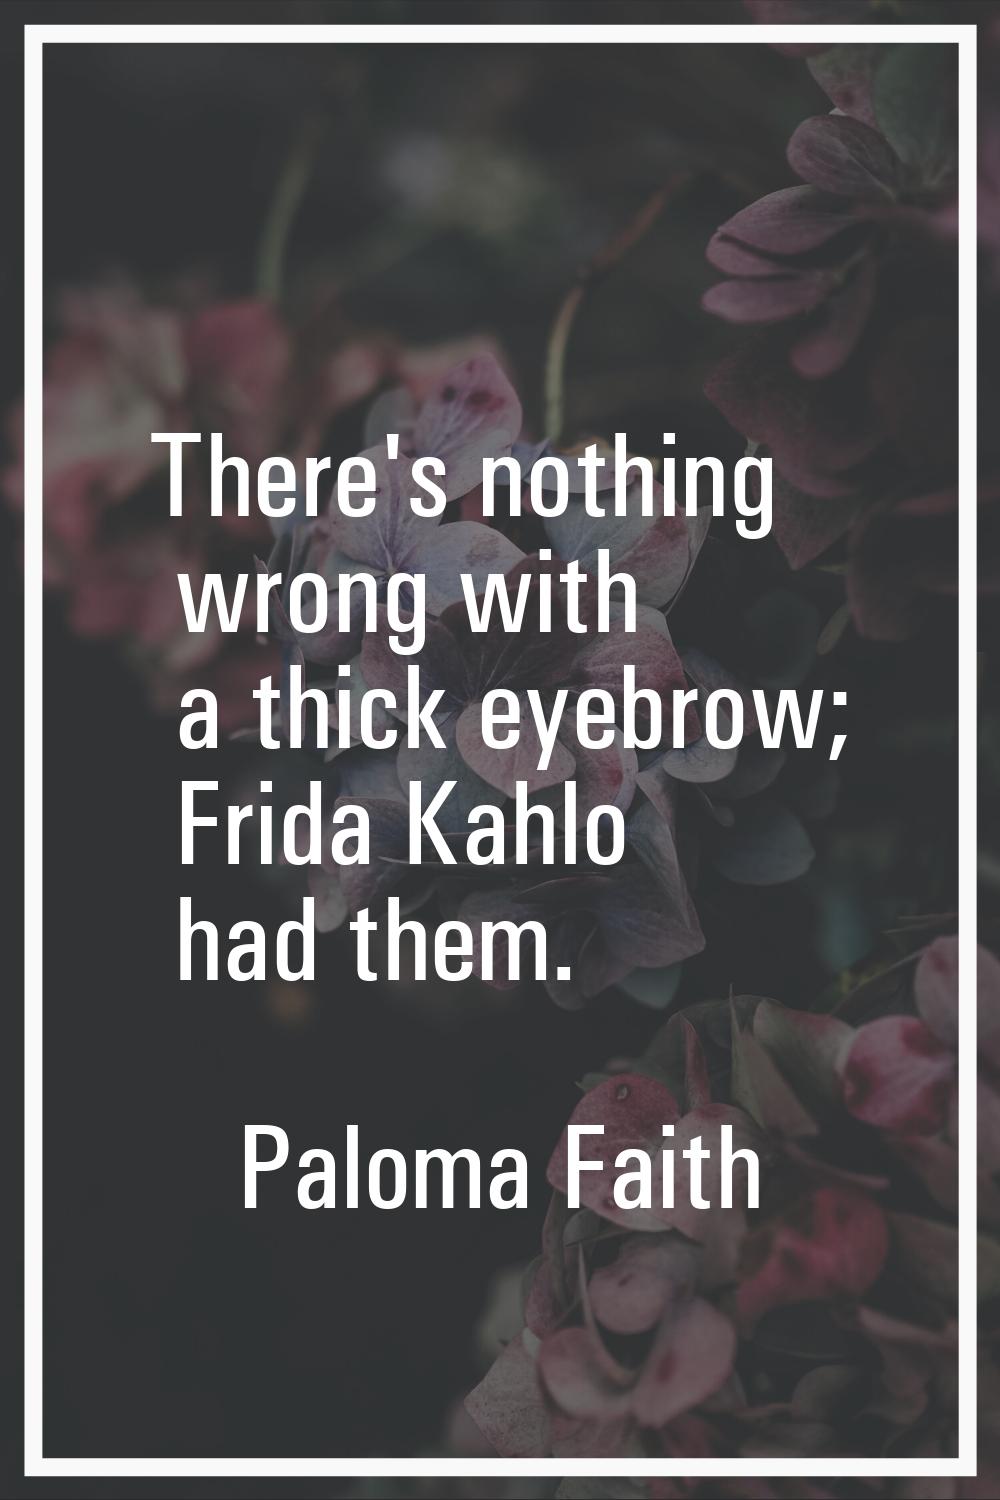 There's nothing wrong with a thick eyebrow; Frida Kahlo had them.